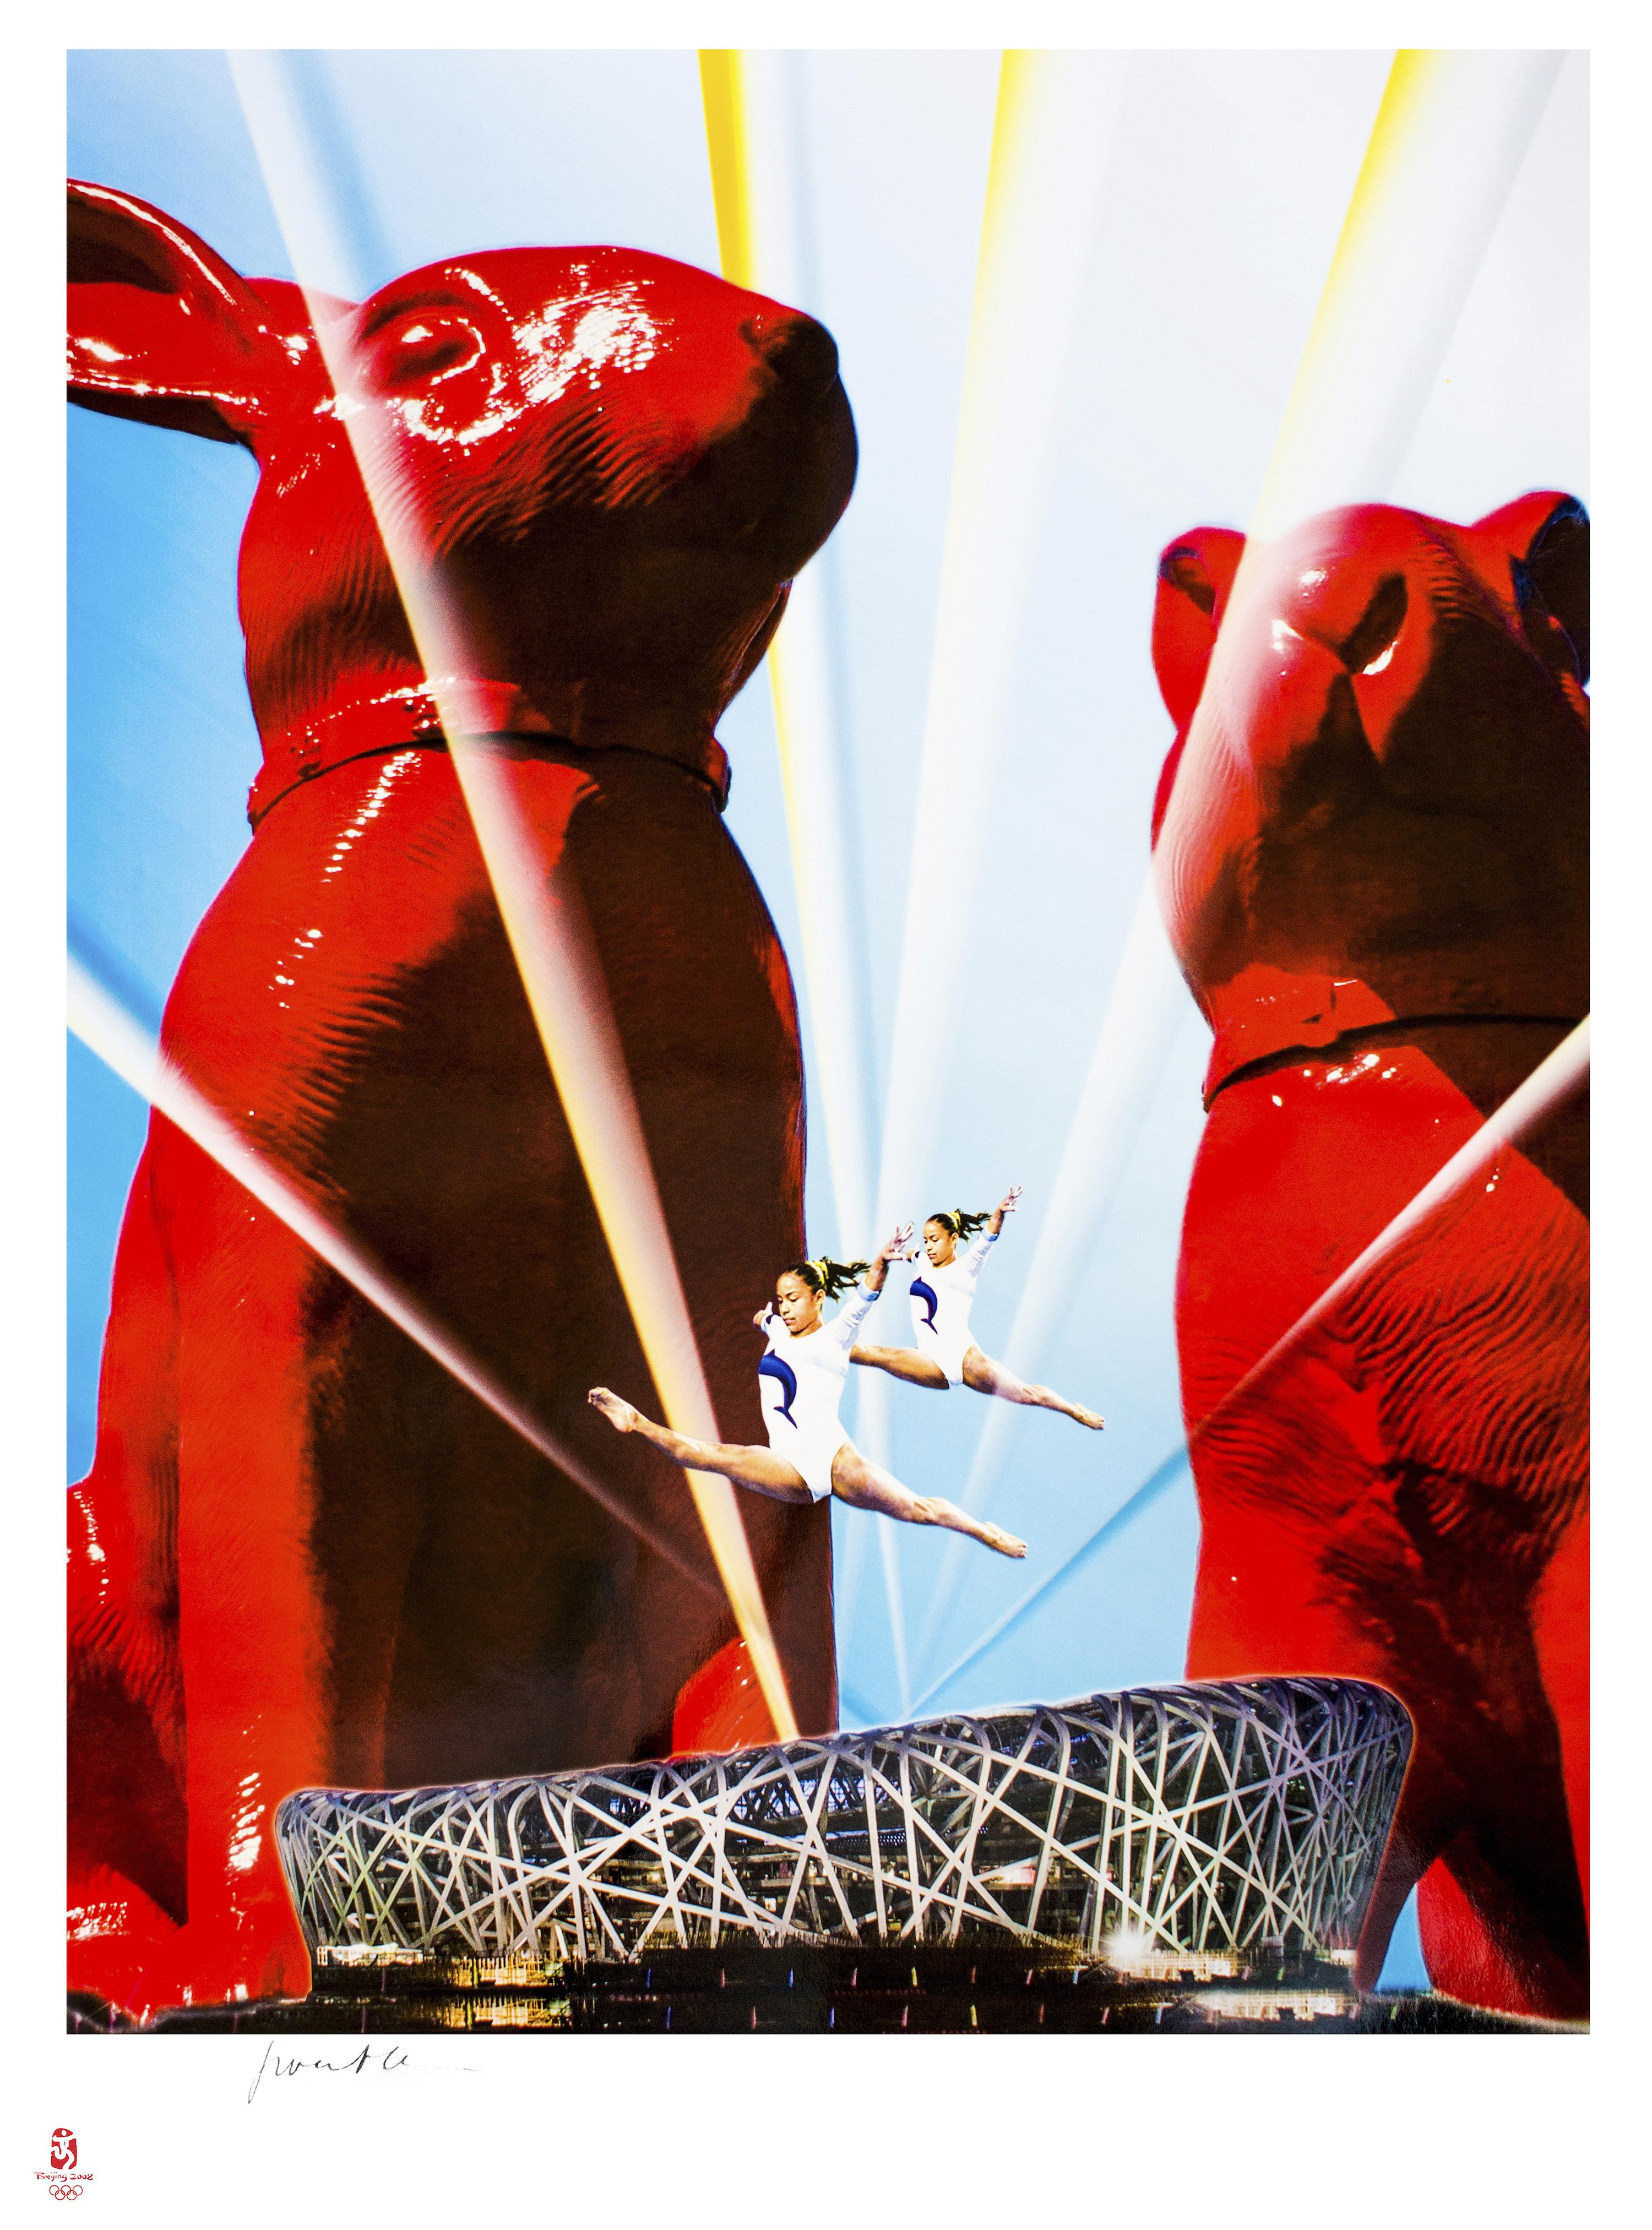 William Sweetlove Animal Print - Olympic Stars Between Cloned Rabbits - Lithograph by W. Sweetlove -2008